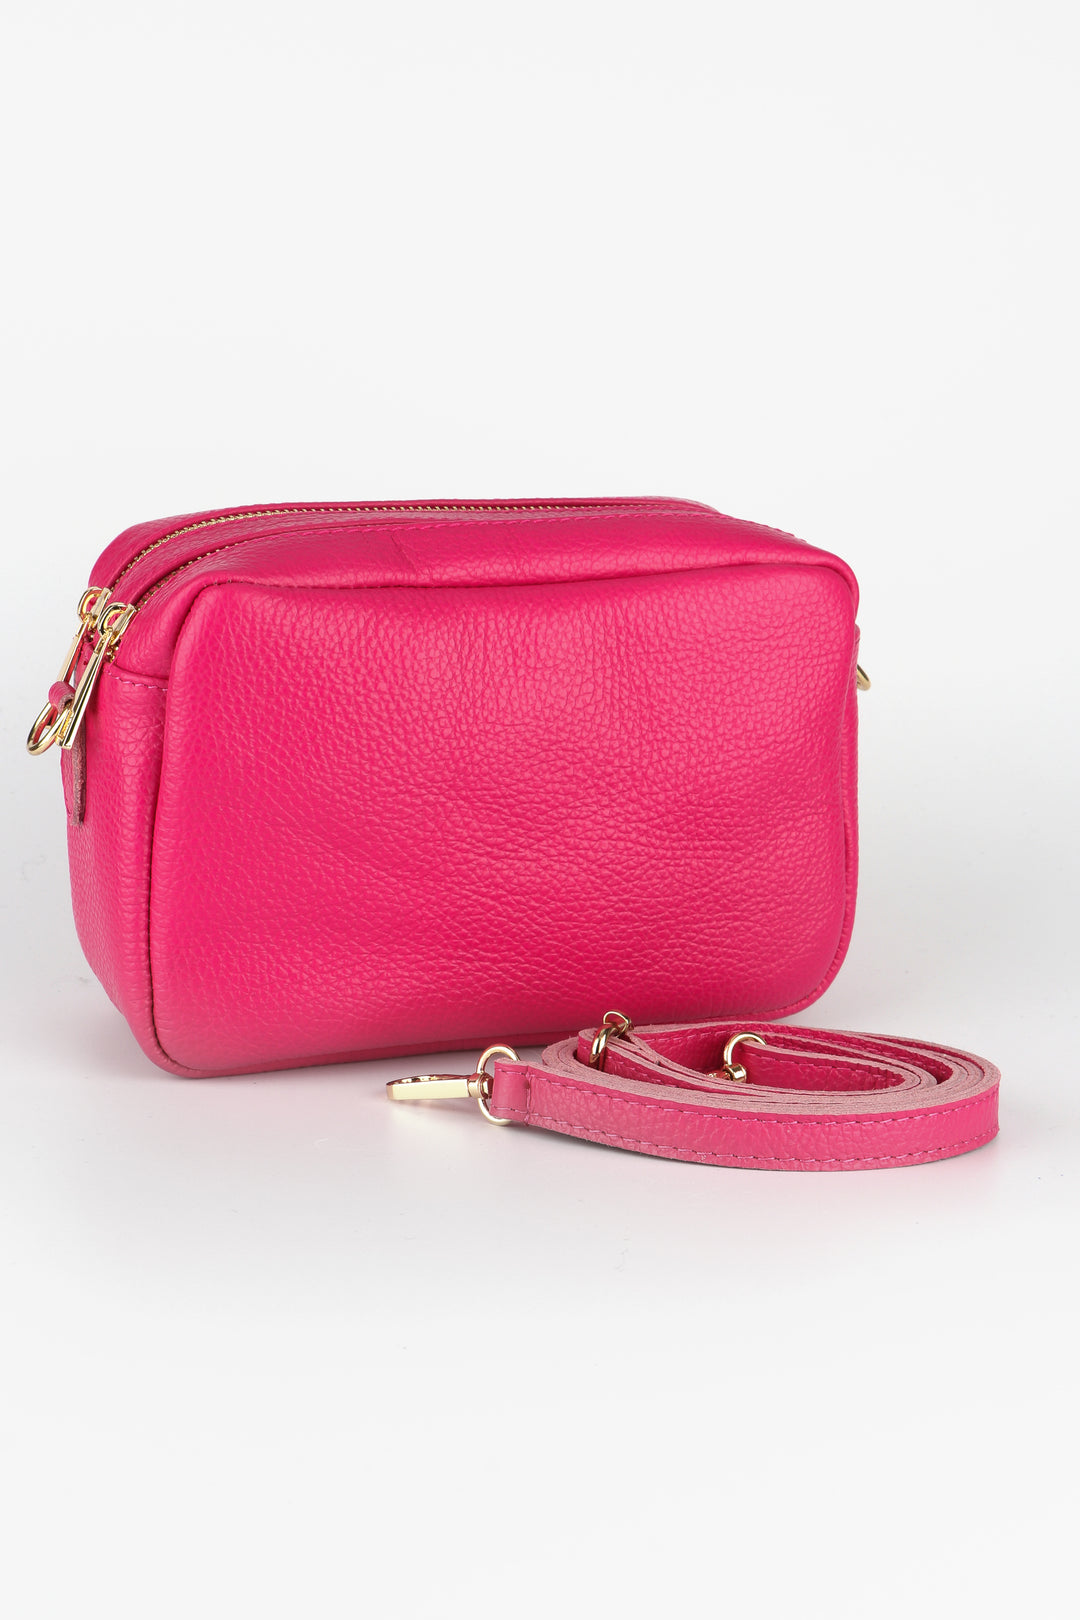 raspberry pink leather crossbody bag with two zip closing compartments and a detachable bag strap